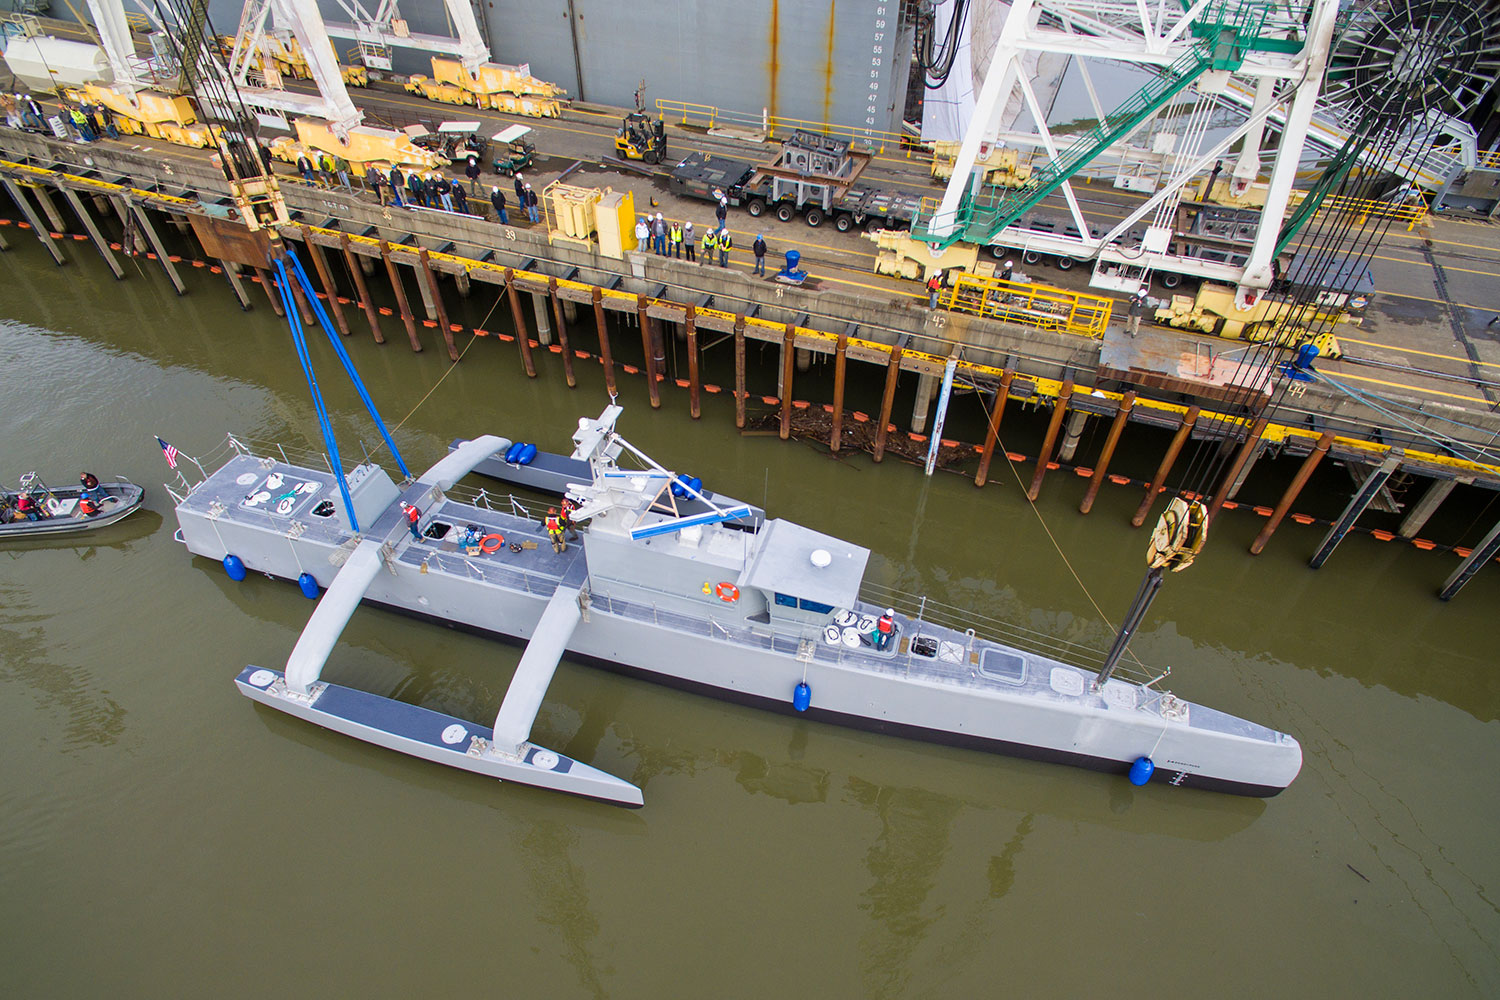 darpa officially christens the actuv in portland launch 5